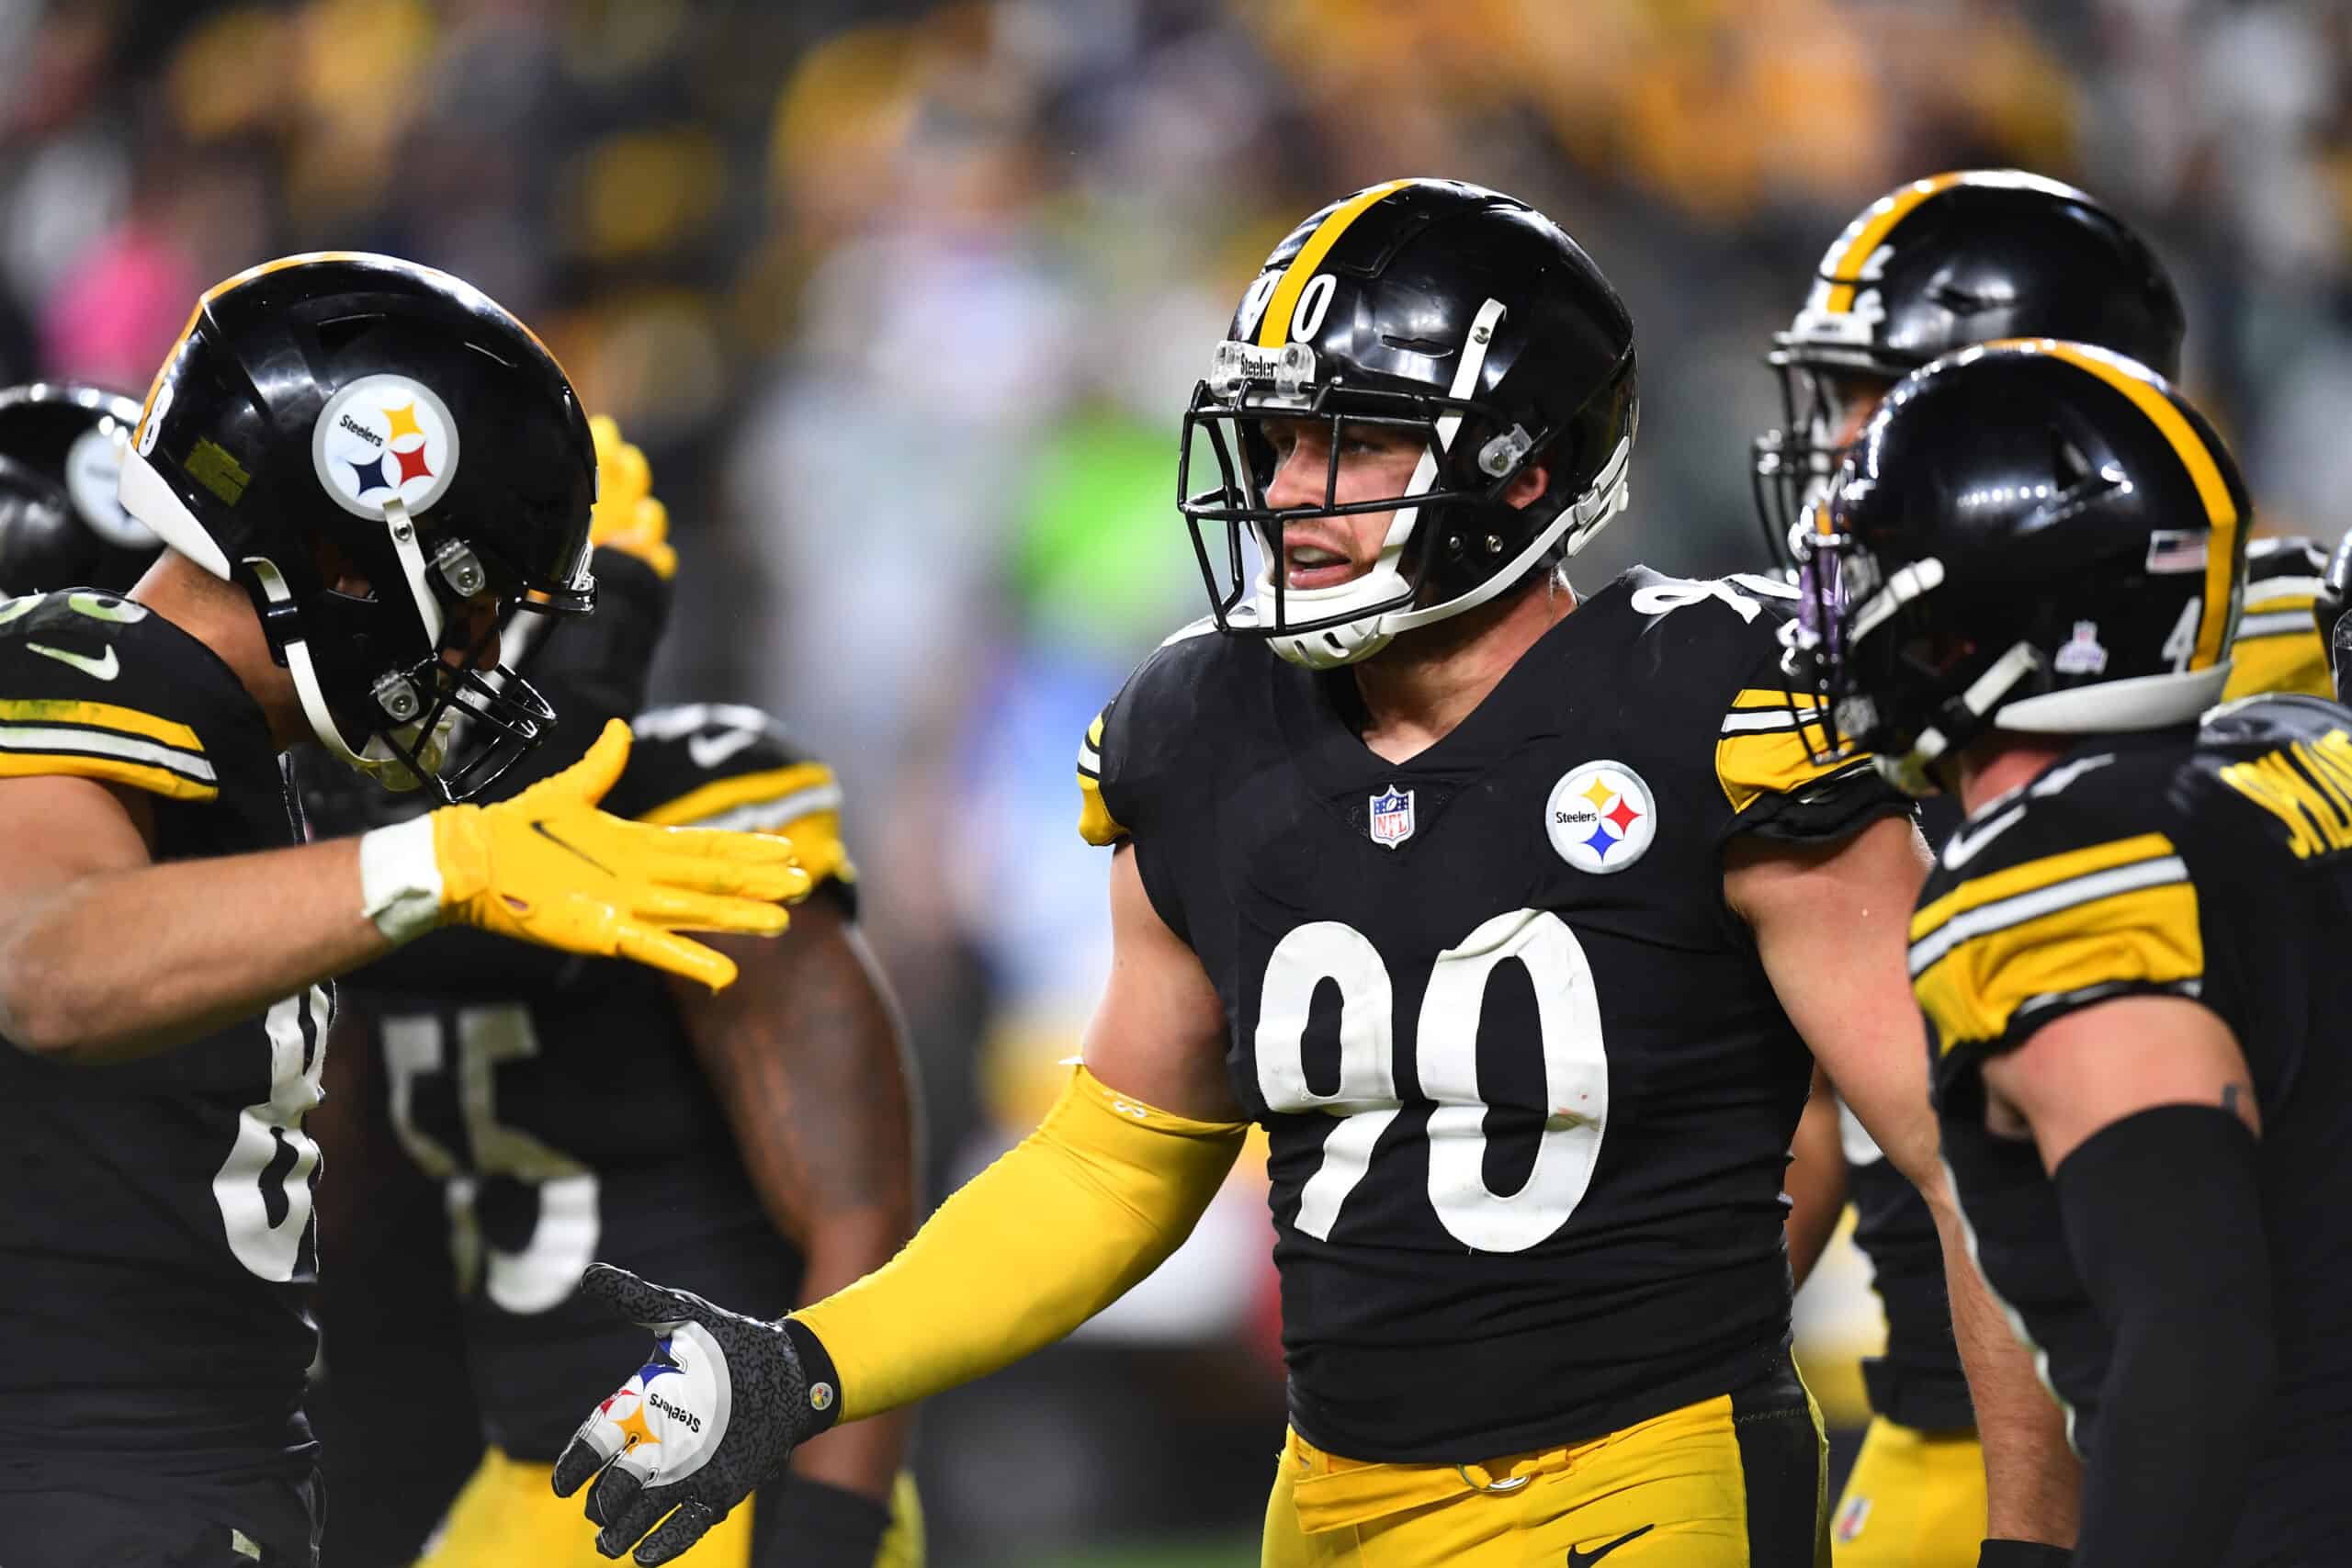 T.J. Watt #90 of the Pittsburgh Steelers celebrates with teammates during the fourth quarter against the Seattle Seahawks at Heinz Field on October 17, 2021 in Pittsburgh, Pennsylvania.